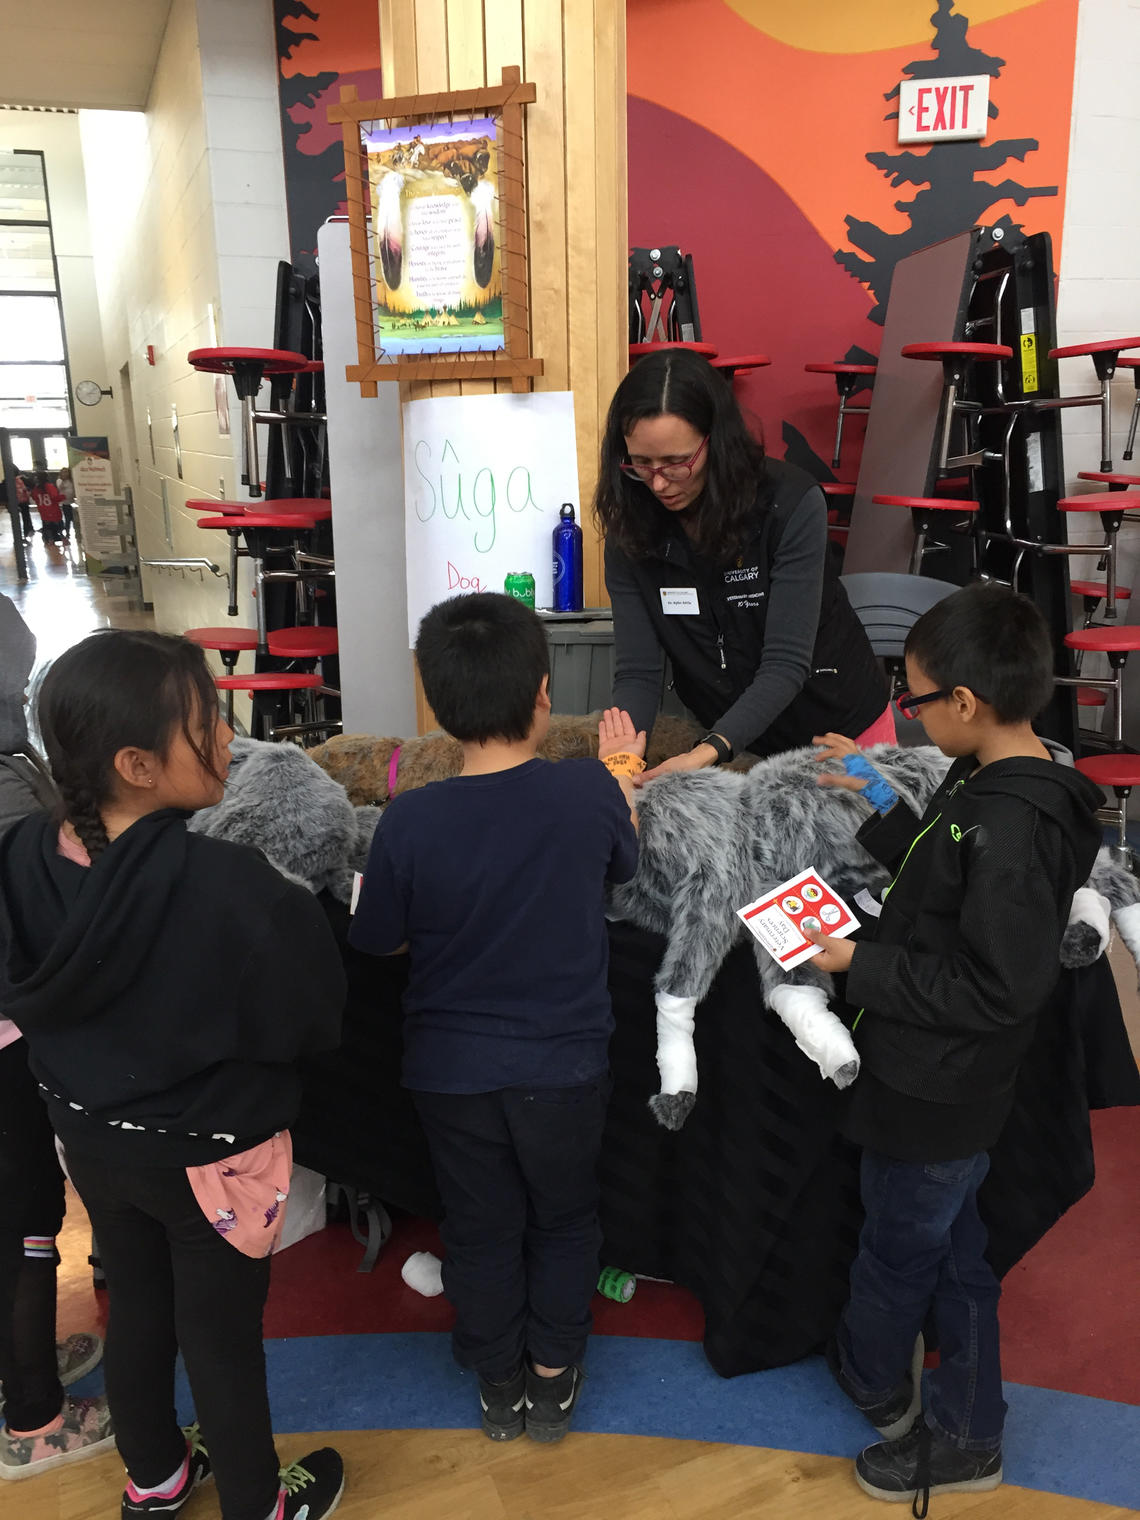 The initiative allows for two-way learning, with Stoney Nakoda students learning about veterinary science and UCVM participants learning about Stoney Nakoda culture and their perspective around animal health.